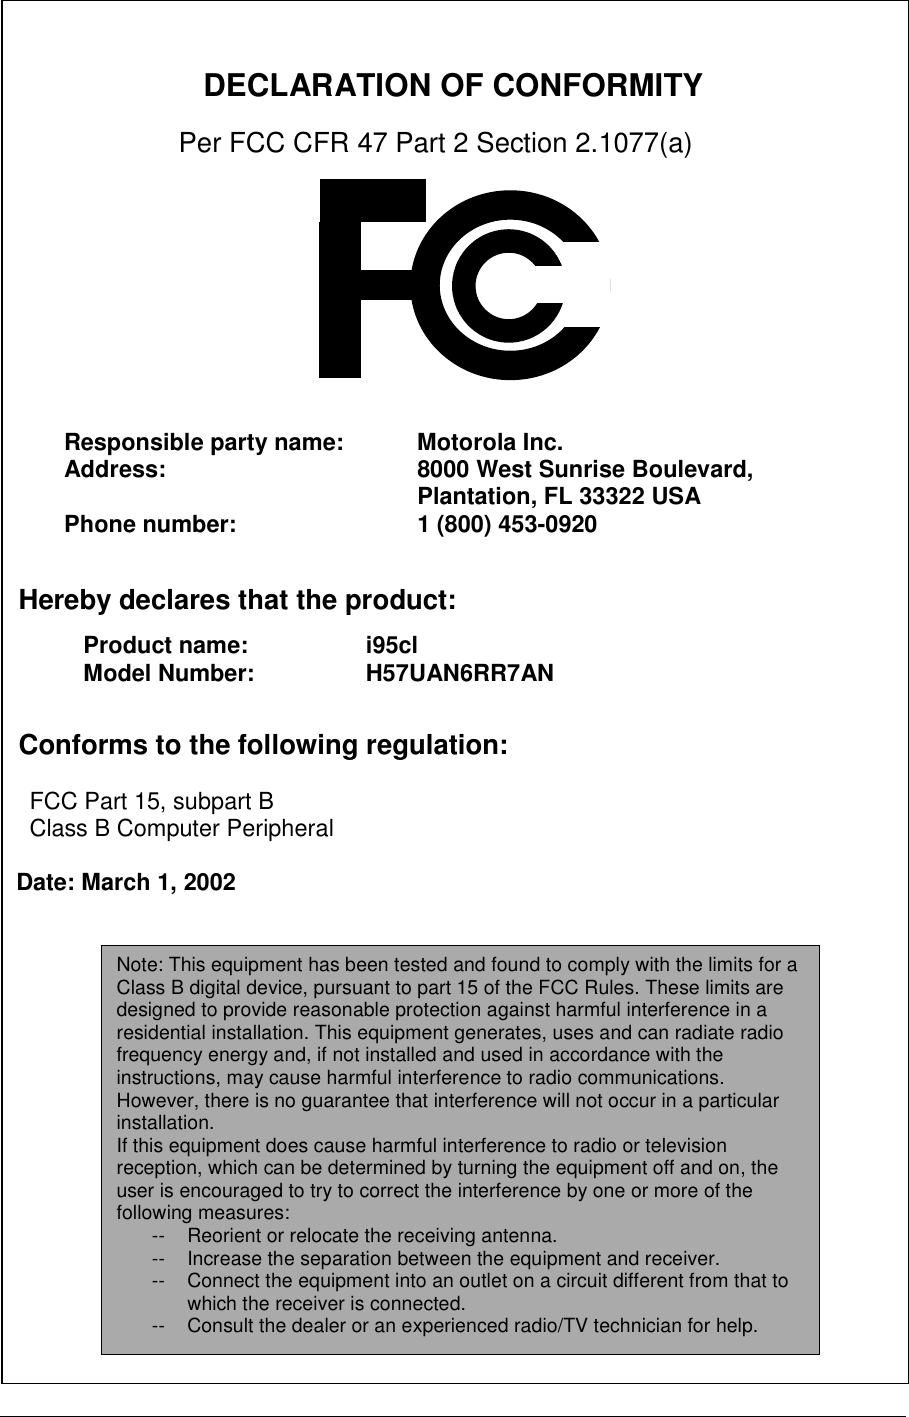          DECLARATION OF CONFORMITY   Per FCC CFR 47 Part 2 Section 2.1077(a)                 Hereby declares that the product:       Conforms to the following regulation:      FCC Part 15, subpart B     Class B Computer Peripheral    Date: March 1, 2002  Responsible party name:  Motorola Inc. Address:  8000 West Sunrise Boulevard, Plantation, FL 33322 USA    Phone number:  1 (800) 453-0920 Product name:     i95clModel Number:     H57UAN6RR7AN  Note: This equipment has been tested and found to comply with the limits for a Class B digital device, pursuant to part 15 of the FCC Rules. These limits are designed to provide reasonable protection against harmful interference in a residential installation. This equipment generates, uses and can radiate radio frequency energy and, if not installed and used in accordance with the instructions, may cause harmful interference to radio communications. However, there is no guarantee that interference will not occur in a particular installation. If this equipment does cause harmful interference to radio or television reception, which can be determined by turning the equipment off and on, the user is encouraged to try to correct the interference by one or more of the following measures: --  Reorient or relocate the receiving antenna. --  Increase the separation between the equipment and receiver. --  Connect the equipment into an outlet on a circuit different from that to which the receiver is connected. --  Consult the dealer or an experienced radio/TV technician for help. 